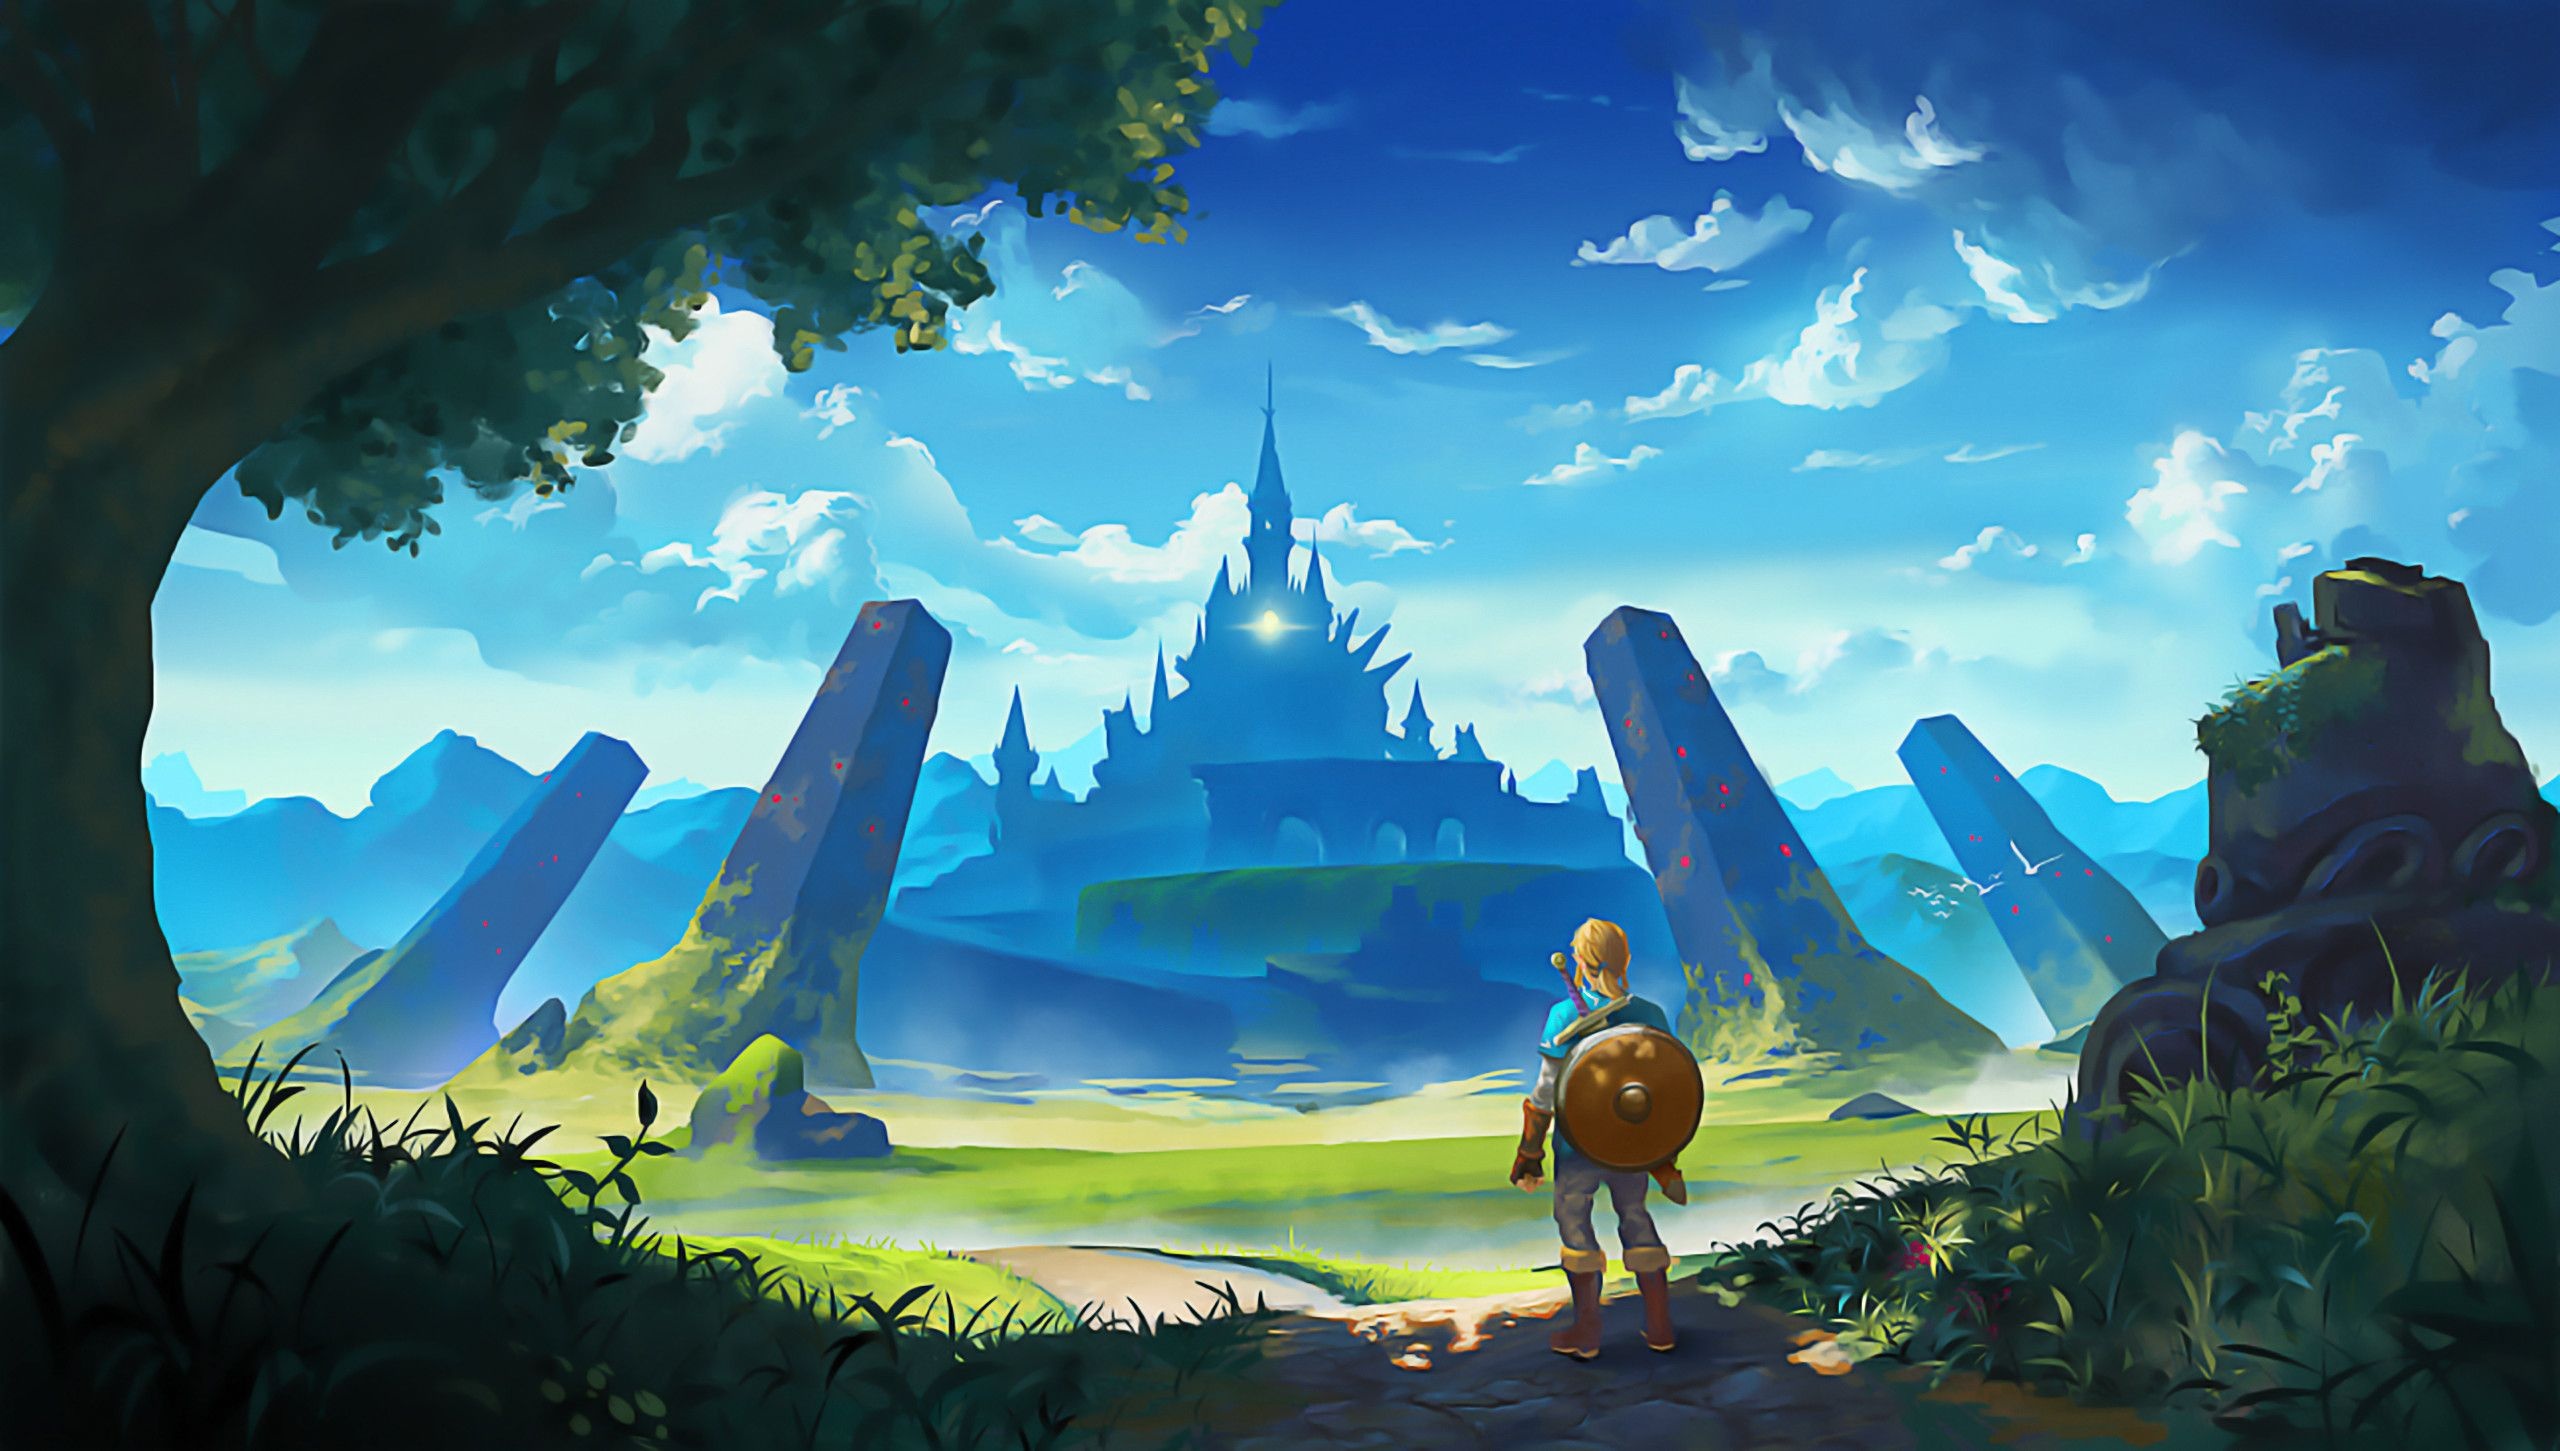 Hyrule Wallpapers - Top Free Hyrule Backgrounds 2560x1460